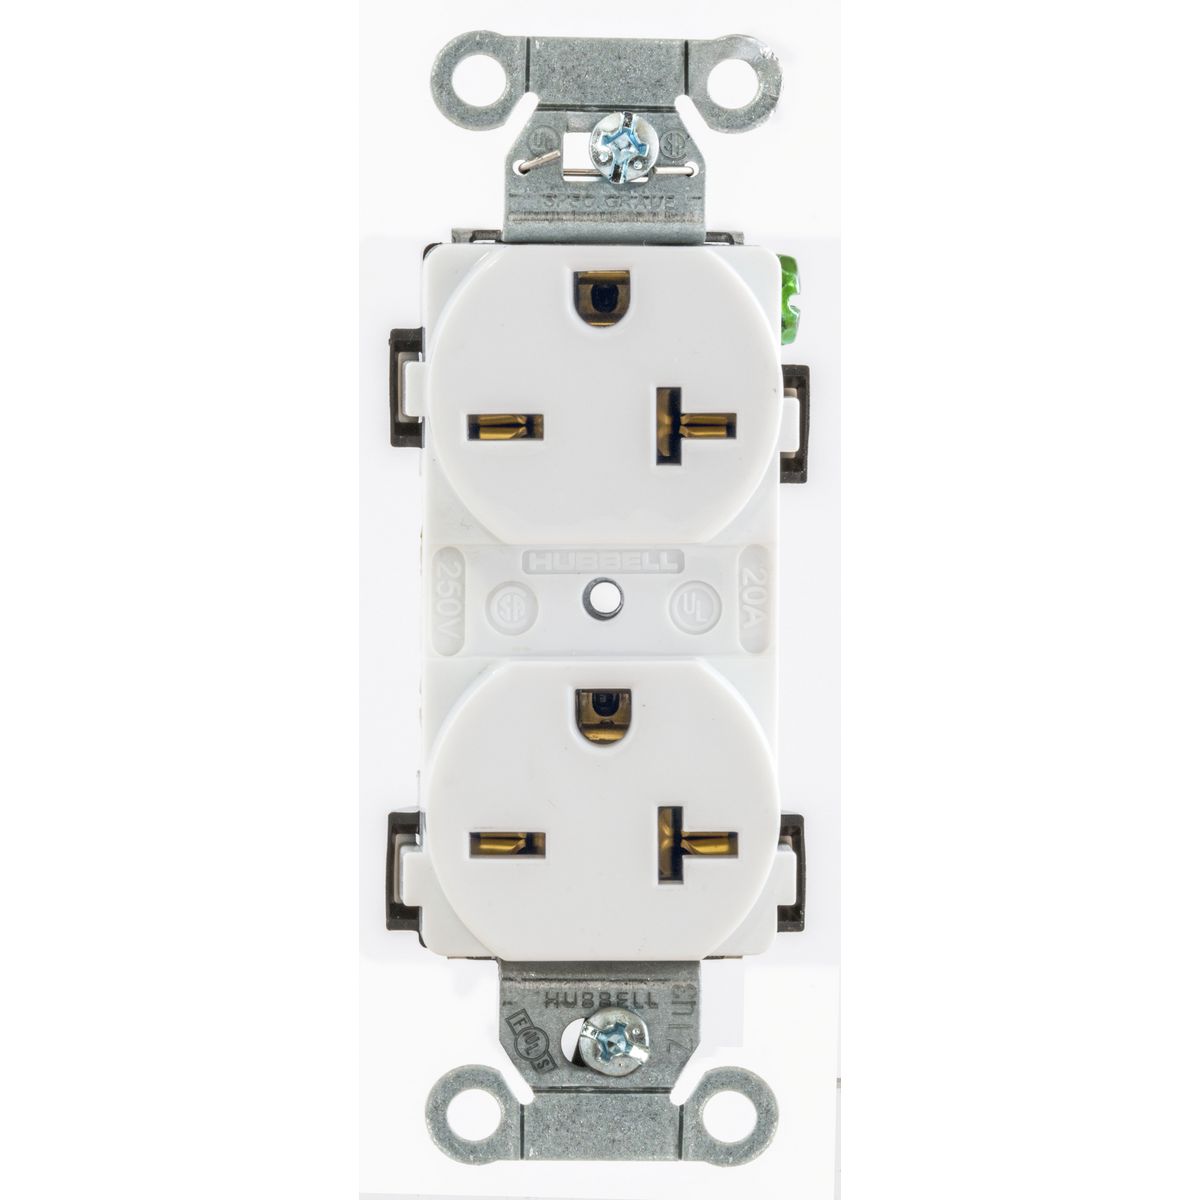 Details about   Hubbell Duplex Receptacle 3-Wire Grounding 20 AMP 5462 Black 